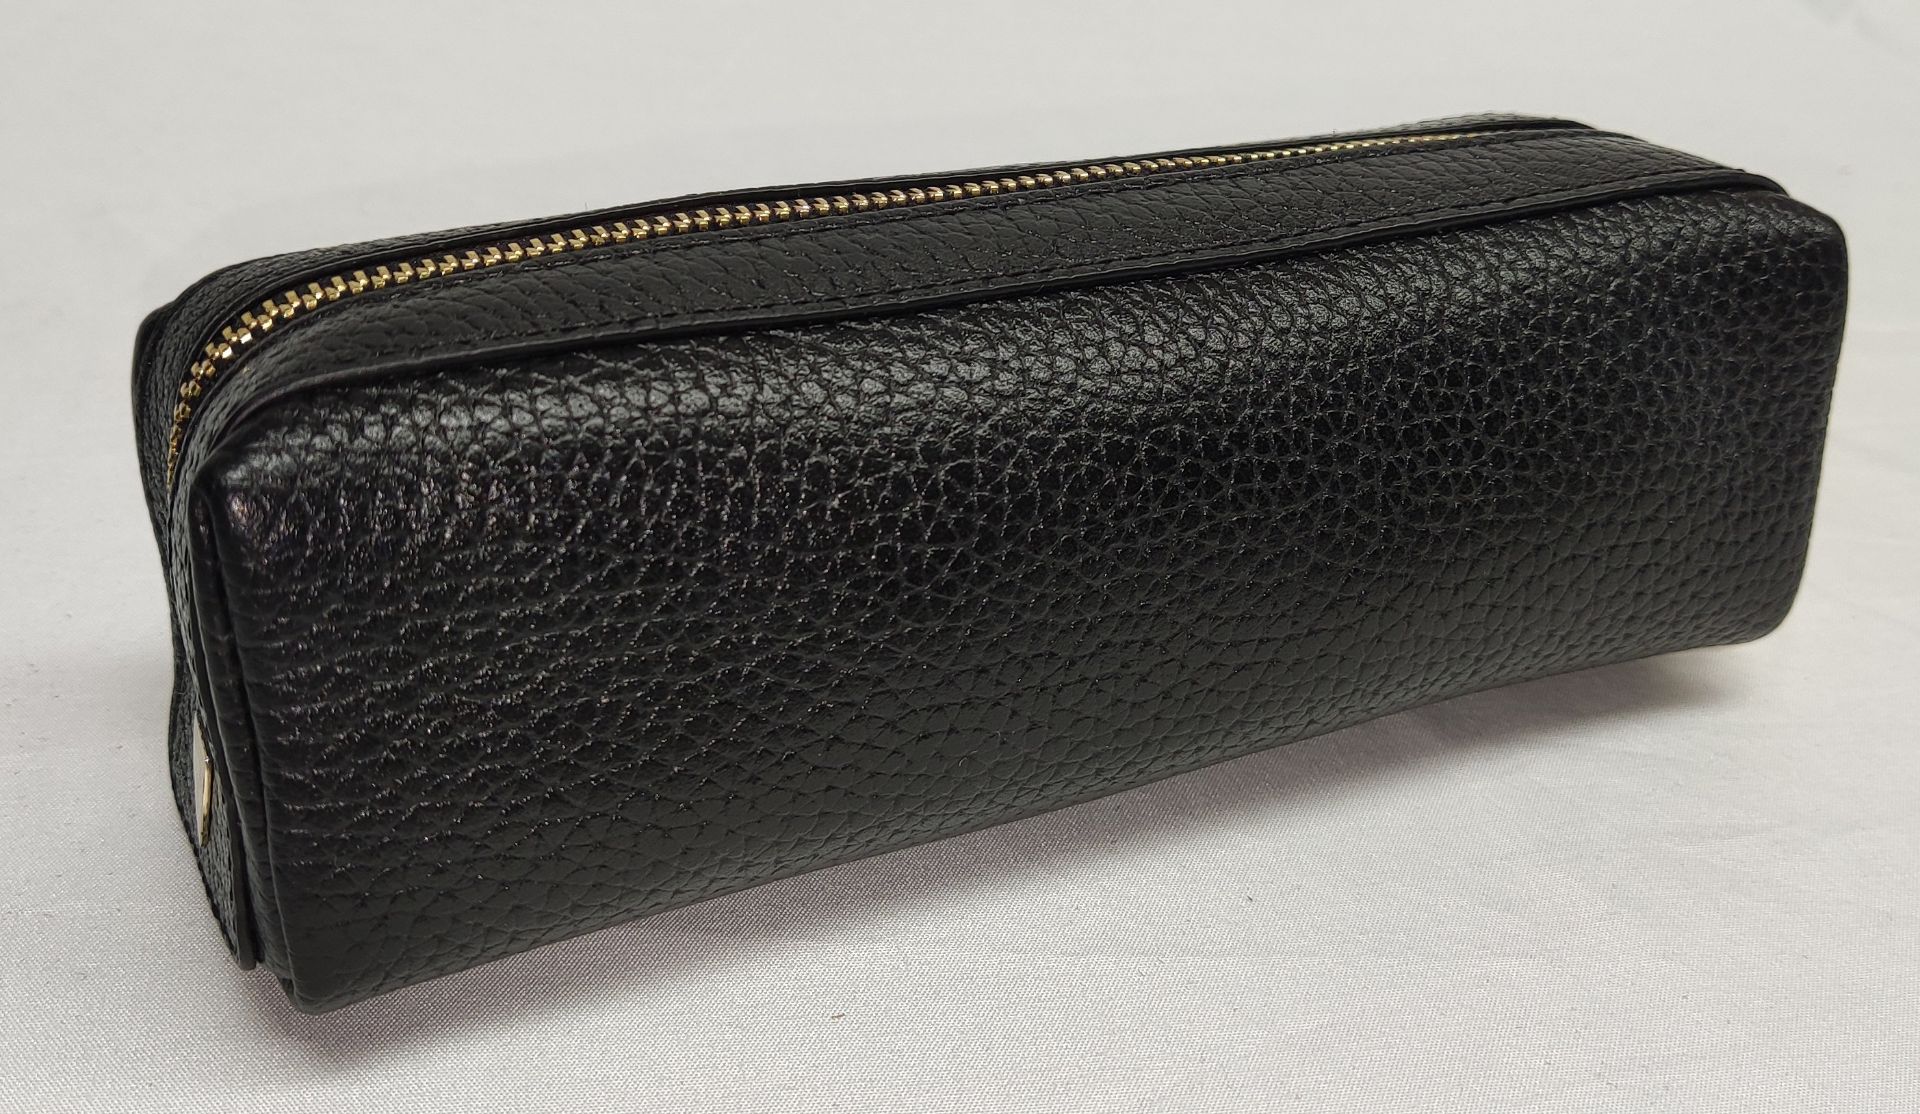 1 x ASPINAL OF LONDON Small London Case In Black Pebble - Boxed - Original RRP £75 - Ref: 6852686/ - Image 9 of 14